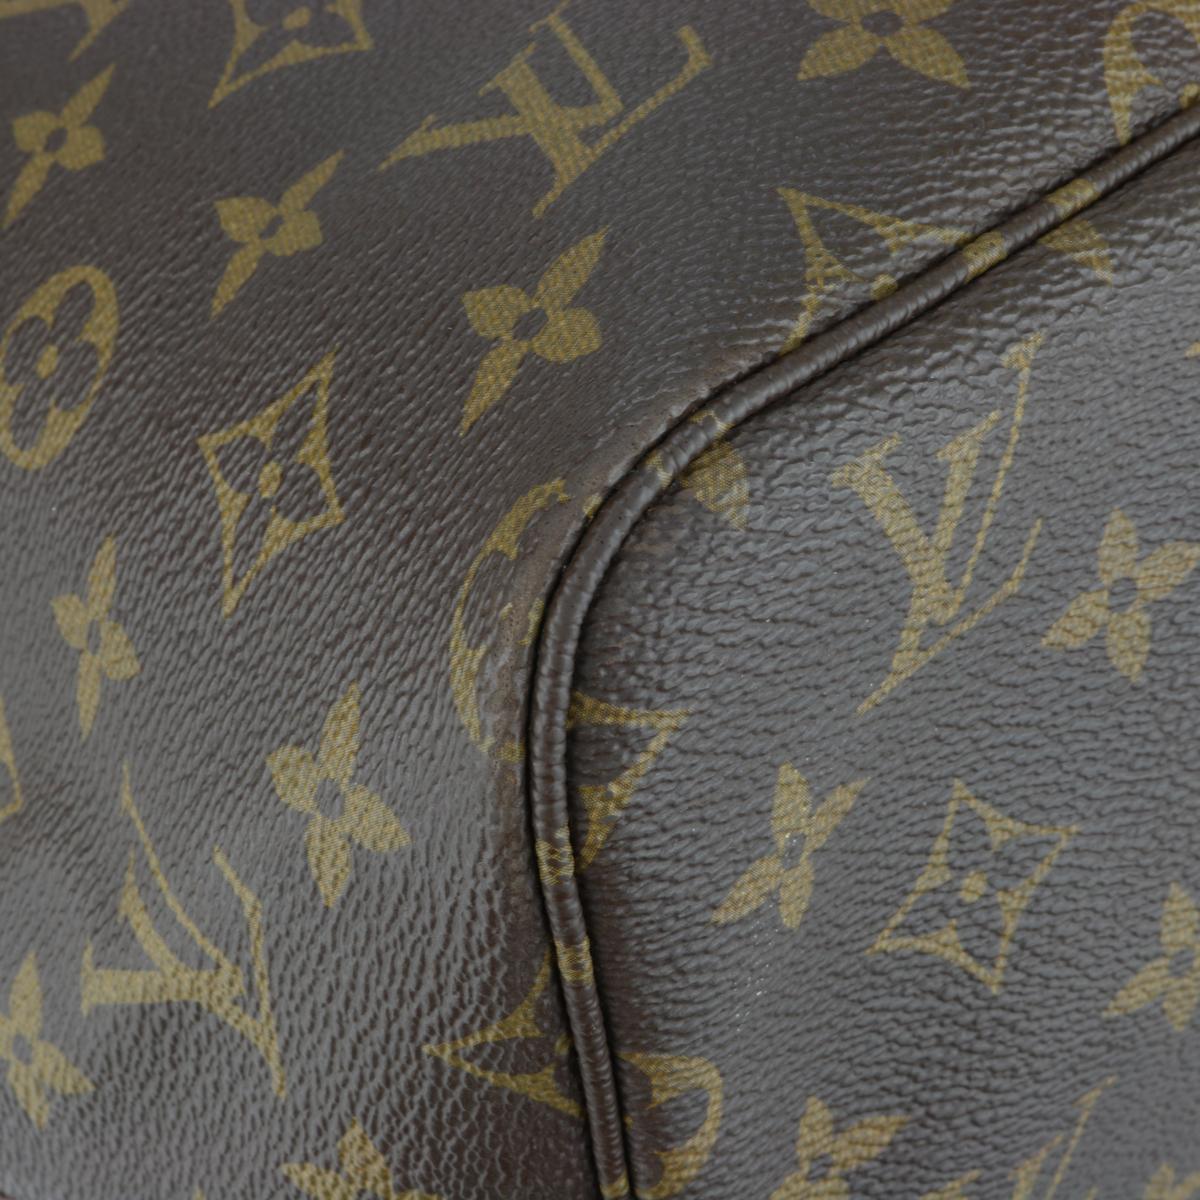 Louis Vuitton Neverfull GM Bag in Monogram with Beige Interior 2008 4